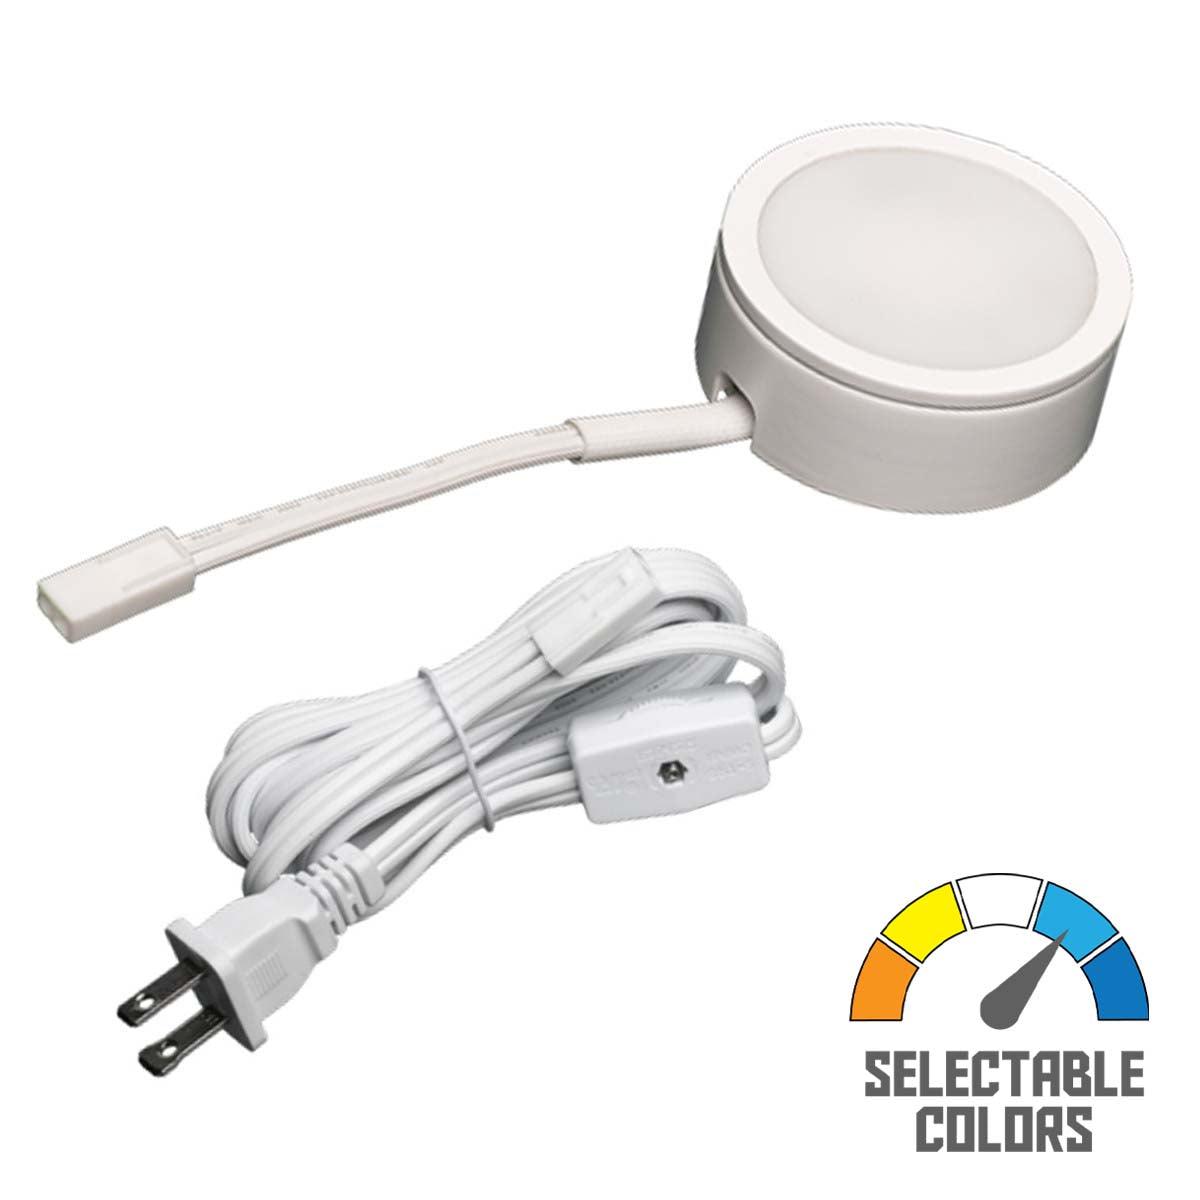 MVP LED Puck Light with 6in Lead Wire and Power Cord, Selectable CCT 2700K to 5000K, 120V, White - Bees Lighting